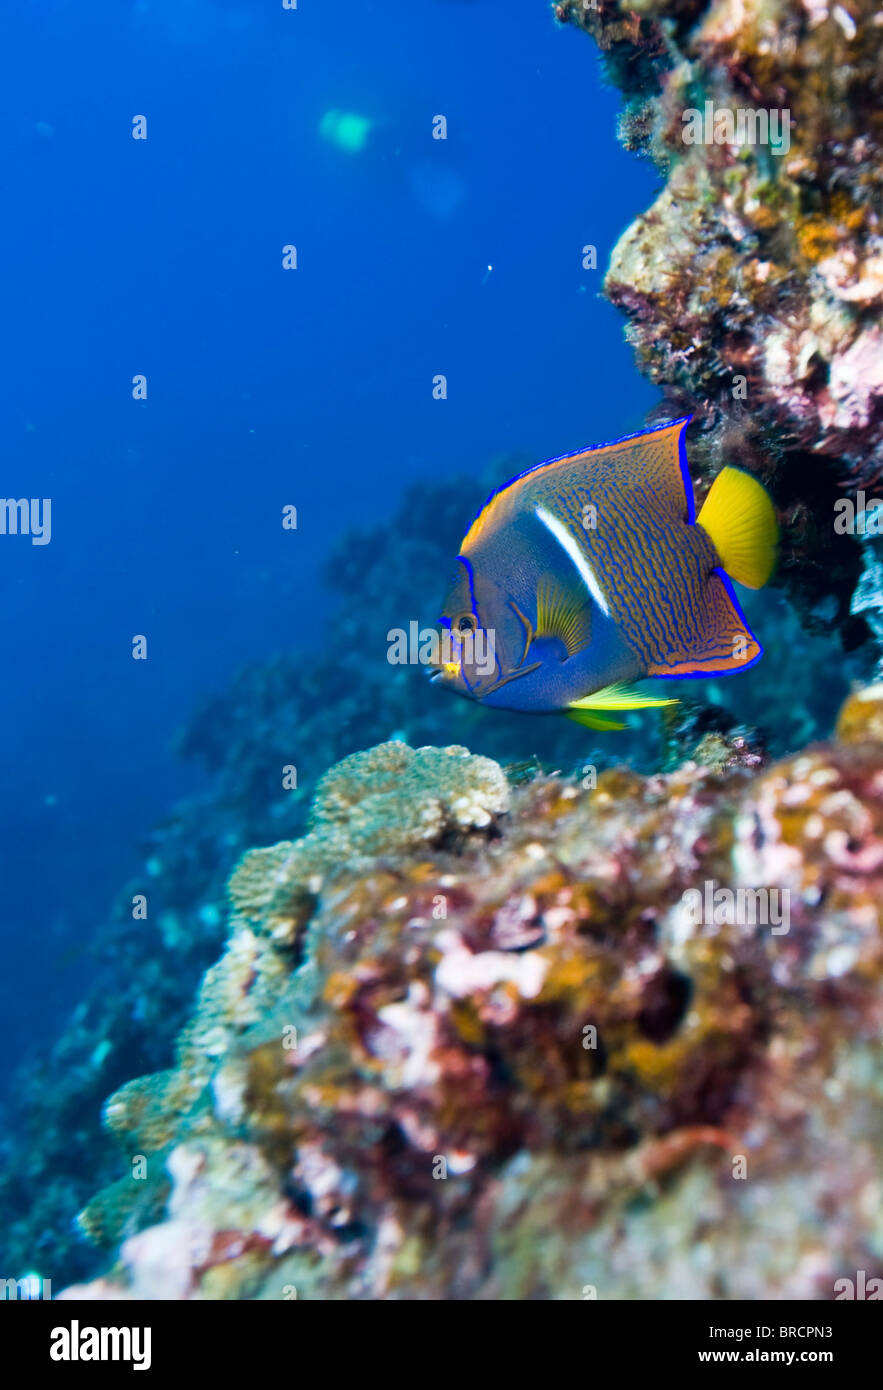 king angelfish, Holacanthus passer, Cocos Island, Costa Rica, East Pacific Ocean Stock Photo